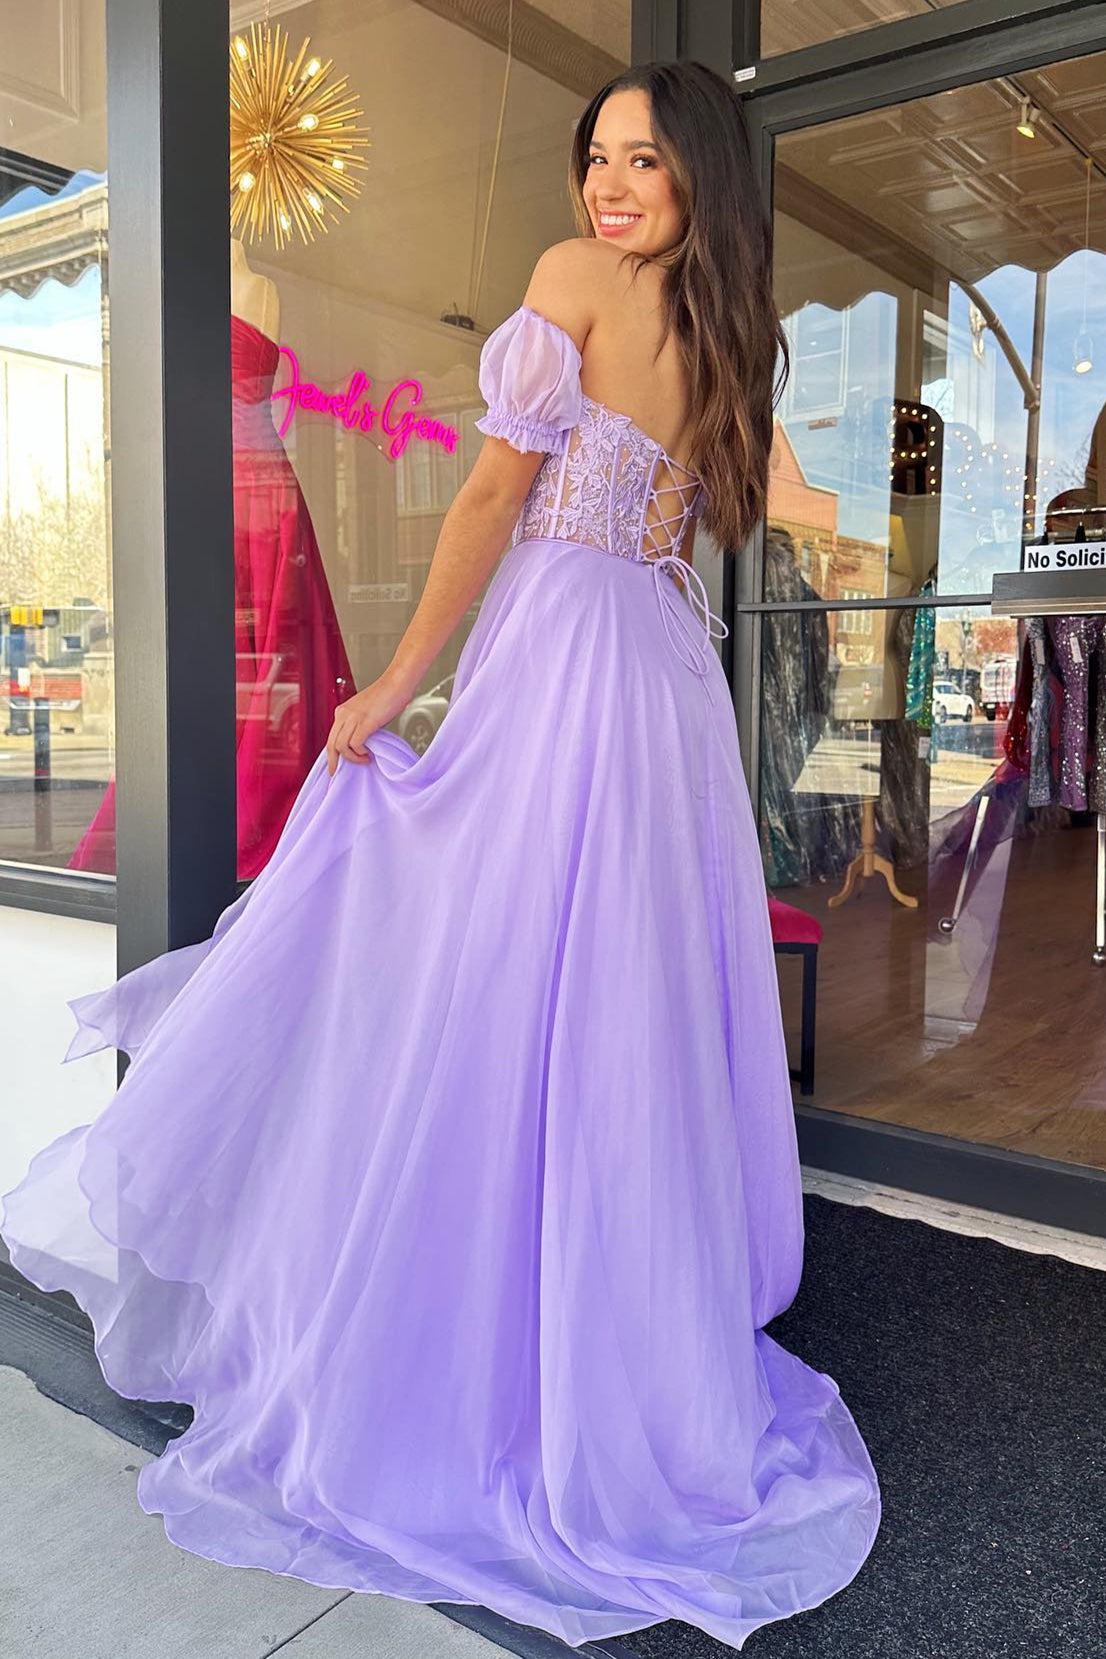 Lilac Applique Strapless A-line Long Prom Gown with Puff Sleeves